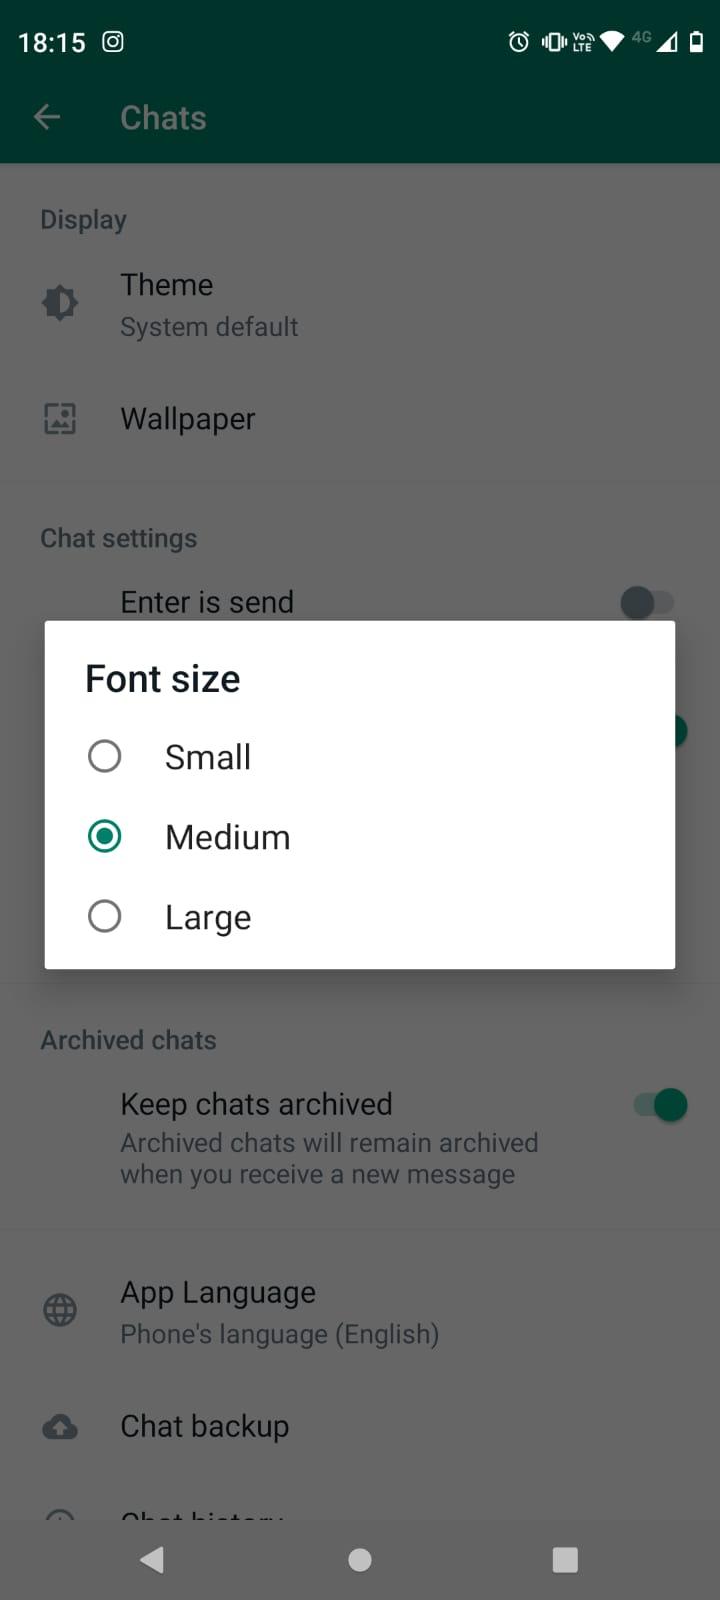 WhatsApp provides its users with various font-size options. 